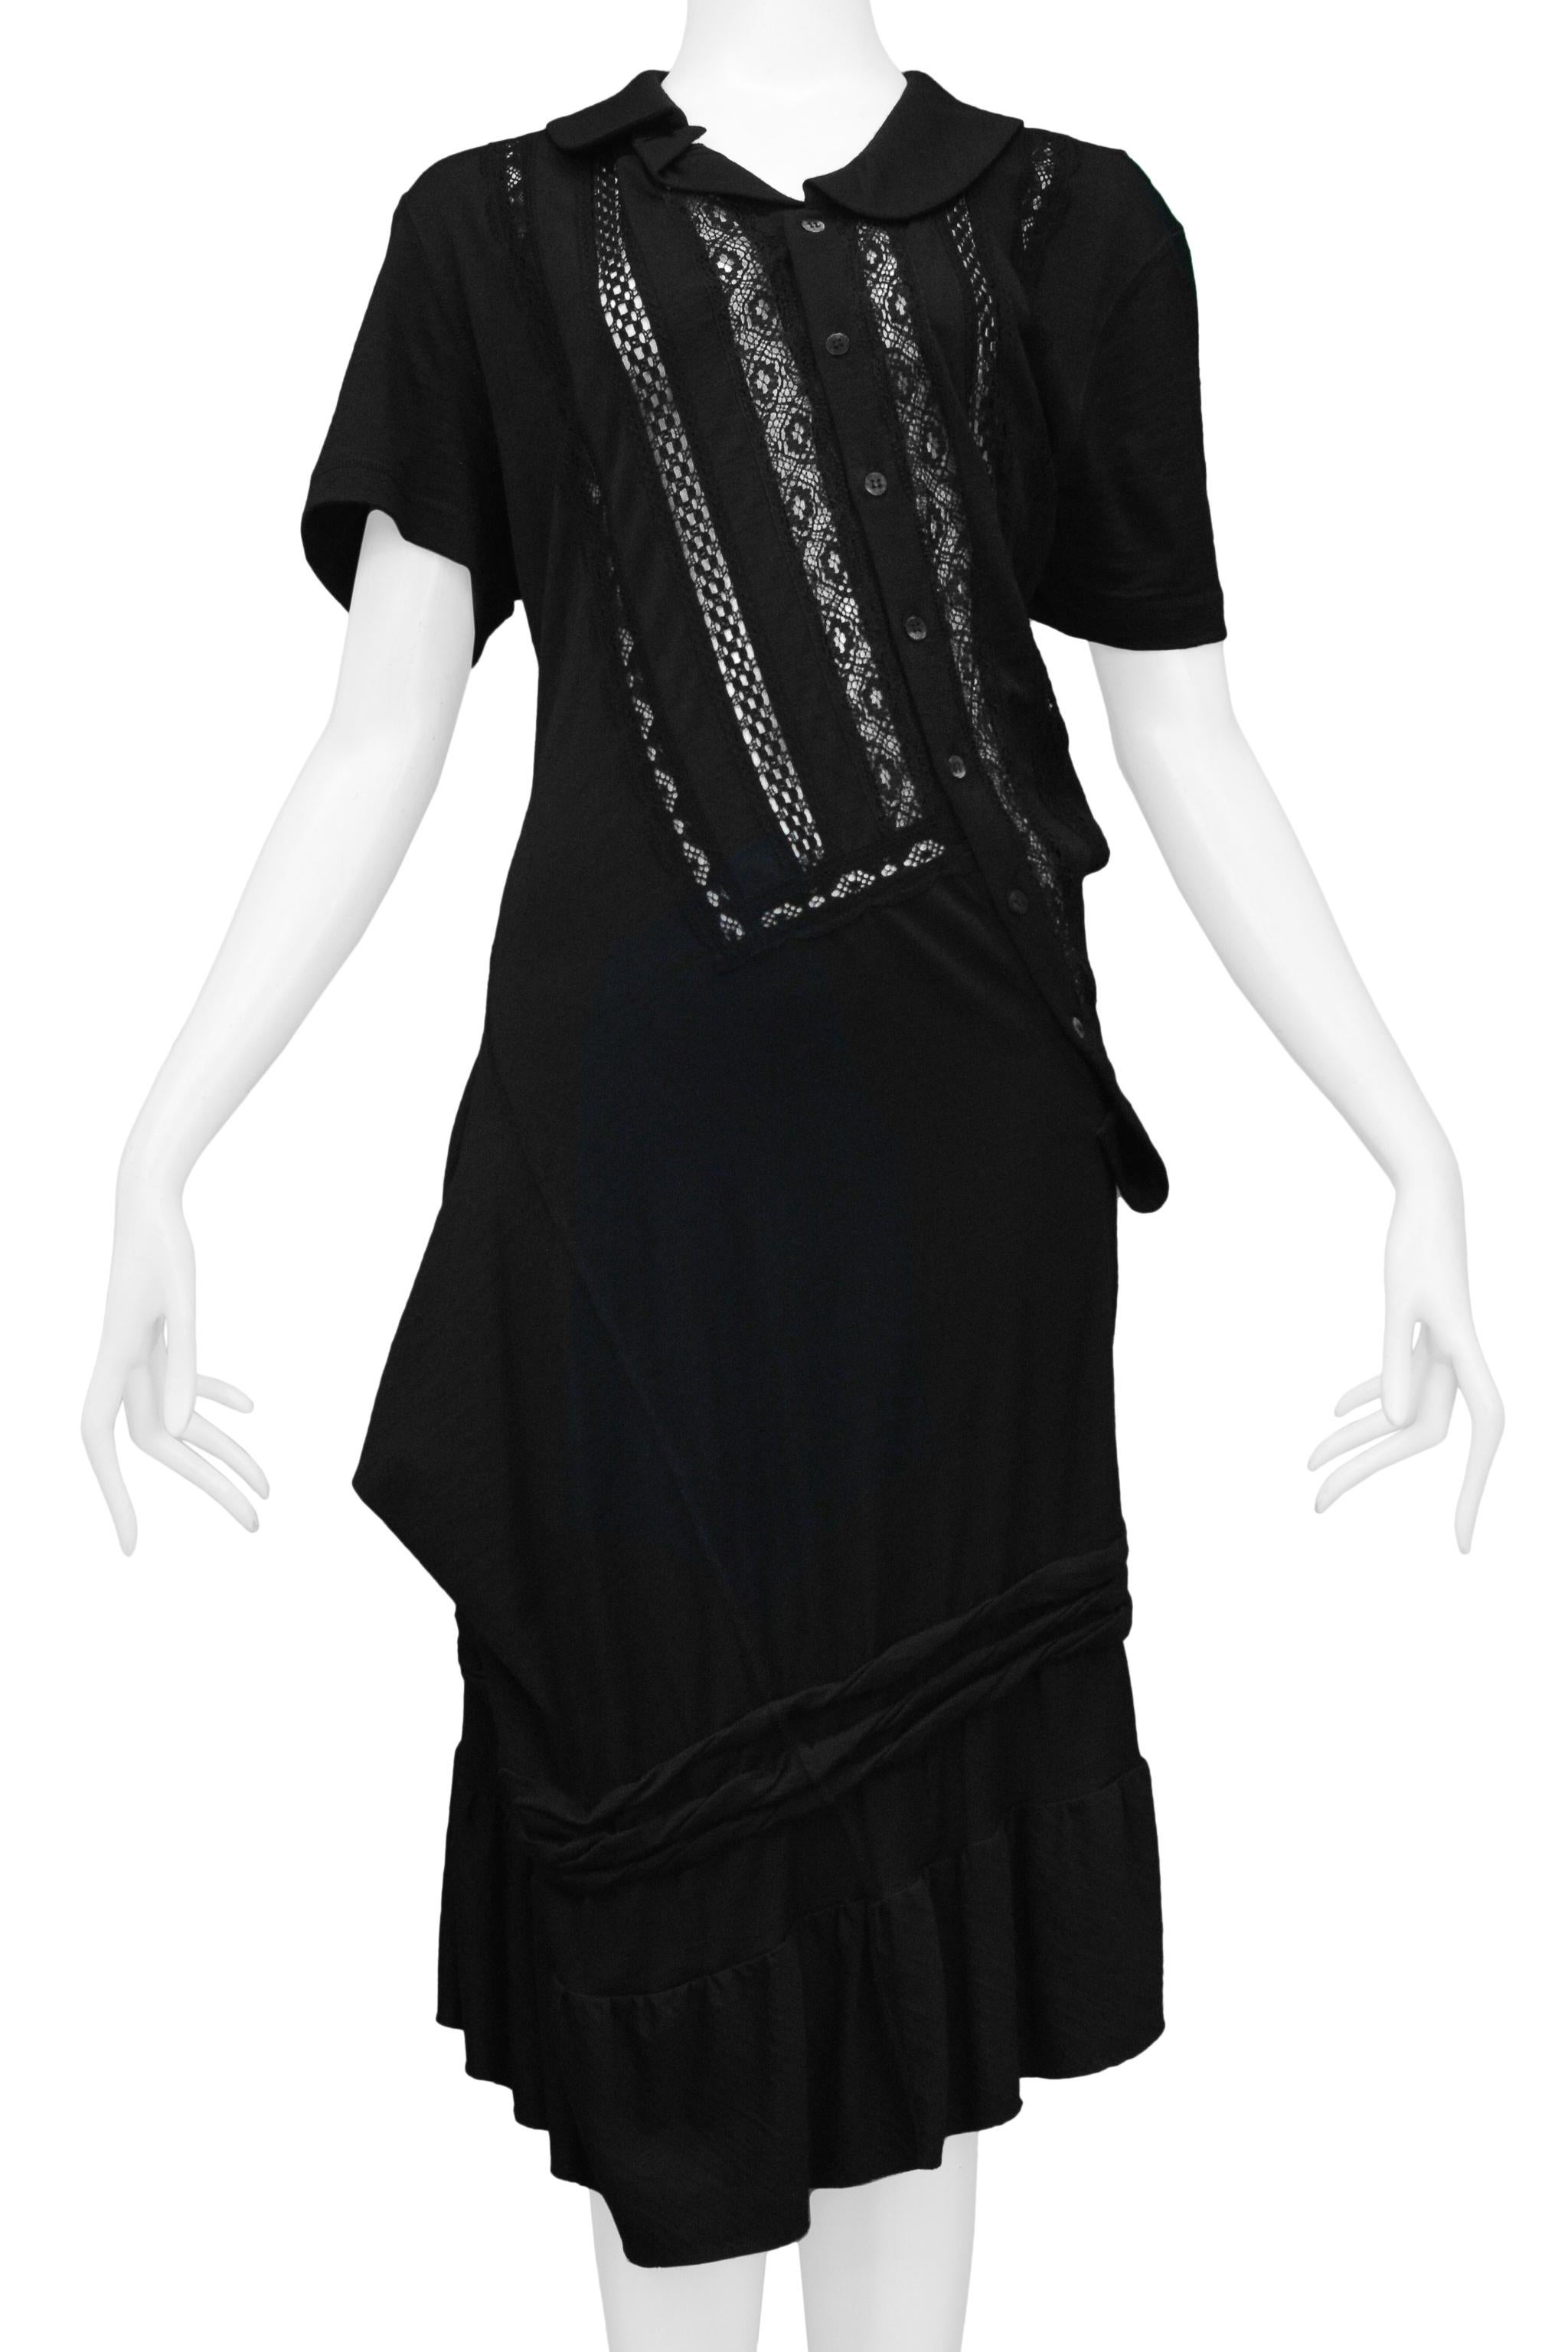 Women's Junya Watanabe Black Twist Dress With Lace Insets 2007 For Sale